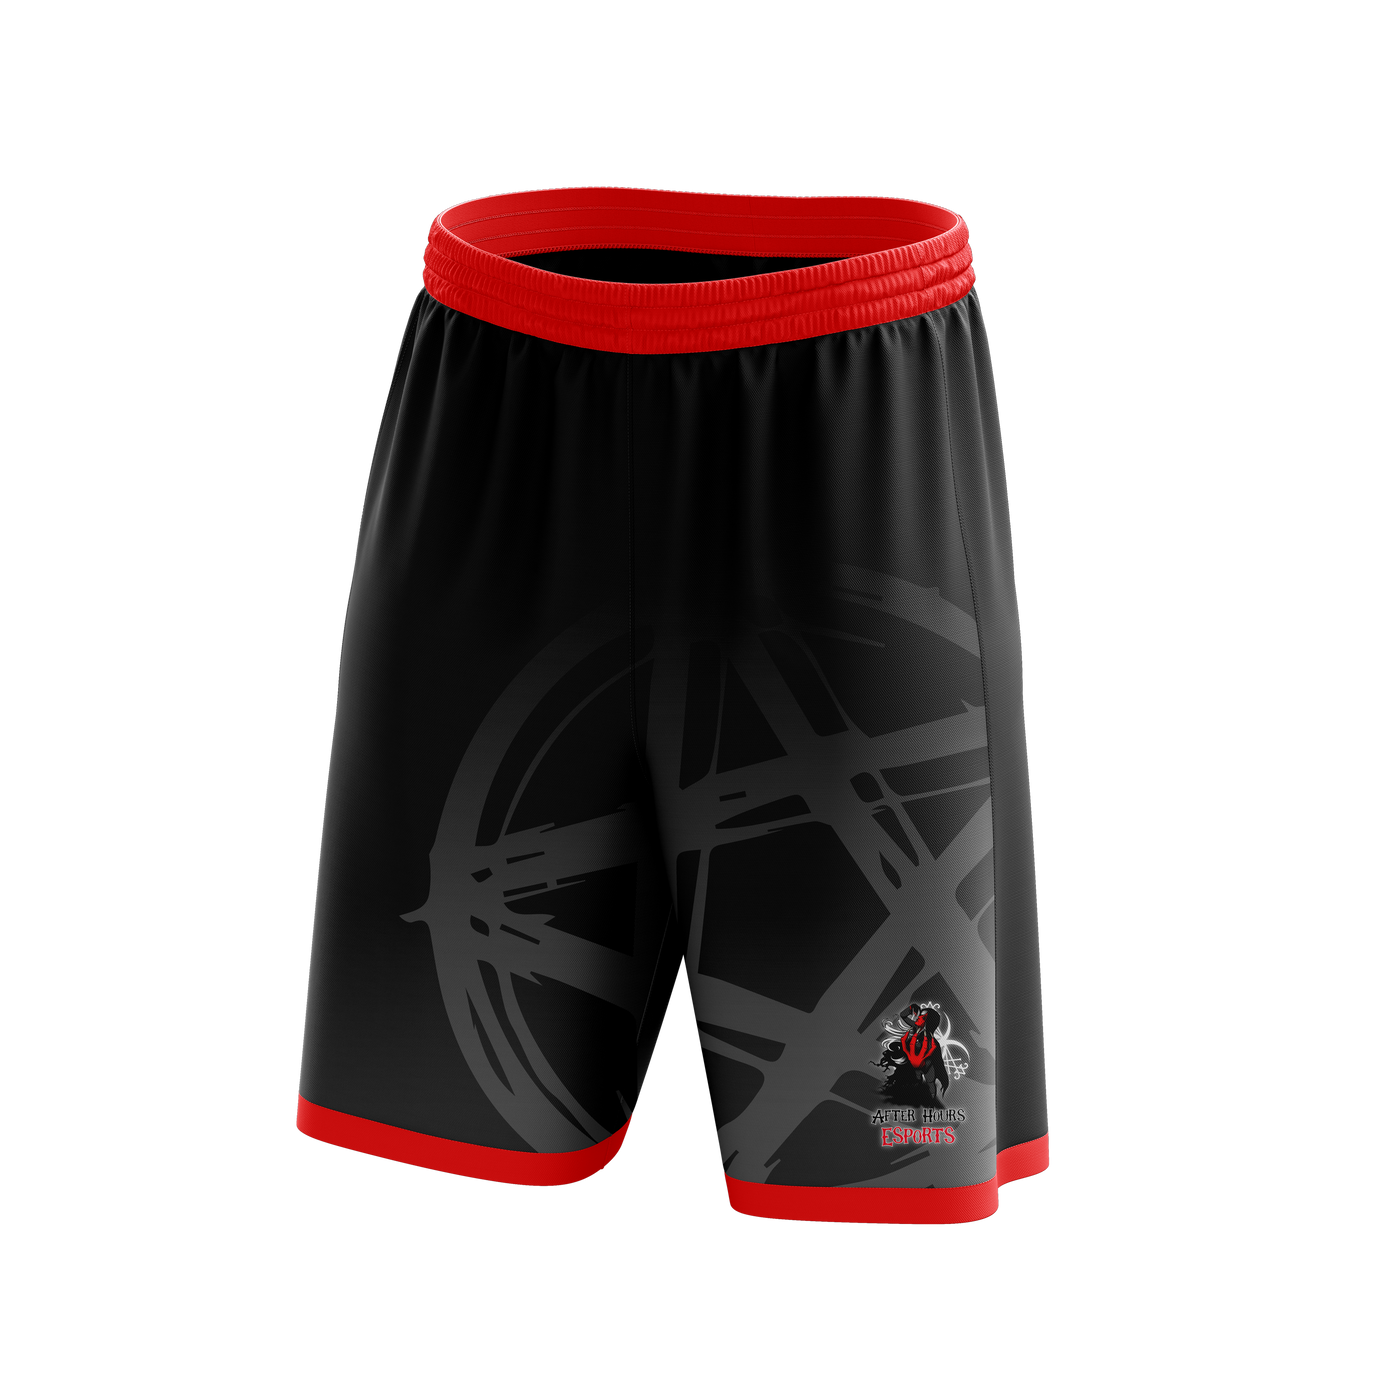 After Hours Esports Pro Basketball Shorts